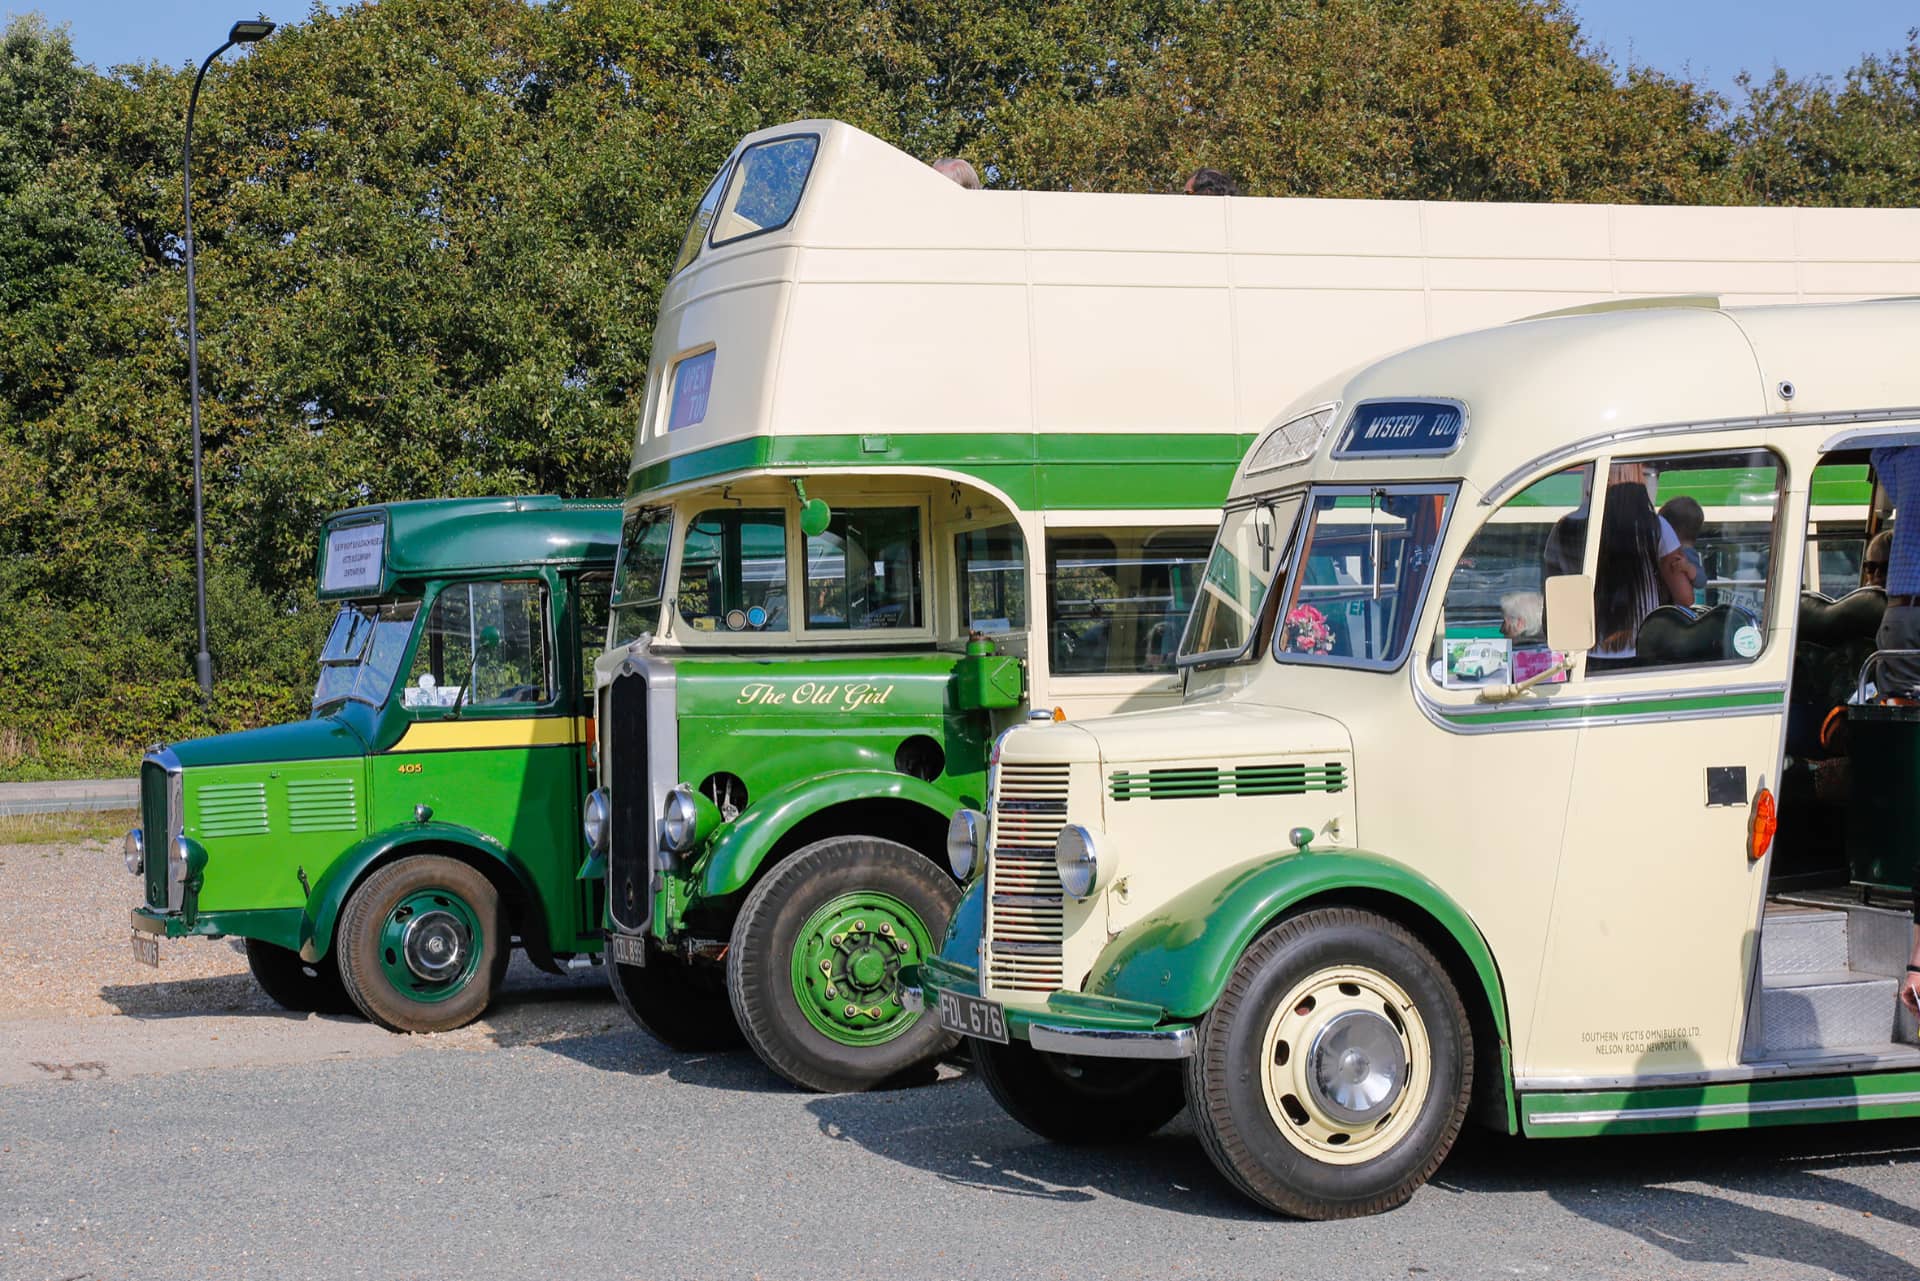 Three vintage Southern Vectis vehicles on the Centenary Tour at Somerton, the site of the original Vectis Bus Company depot